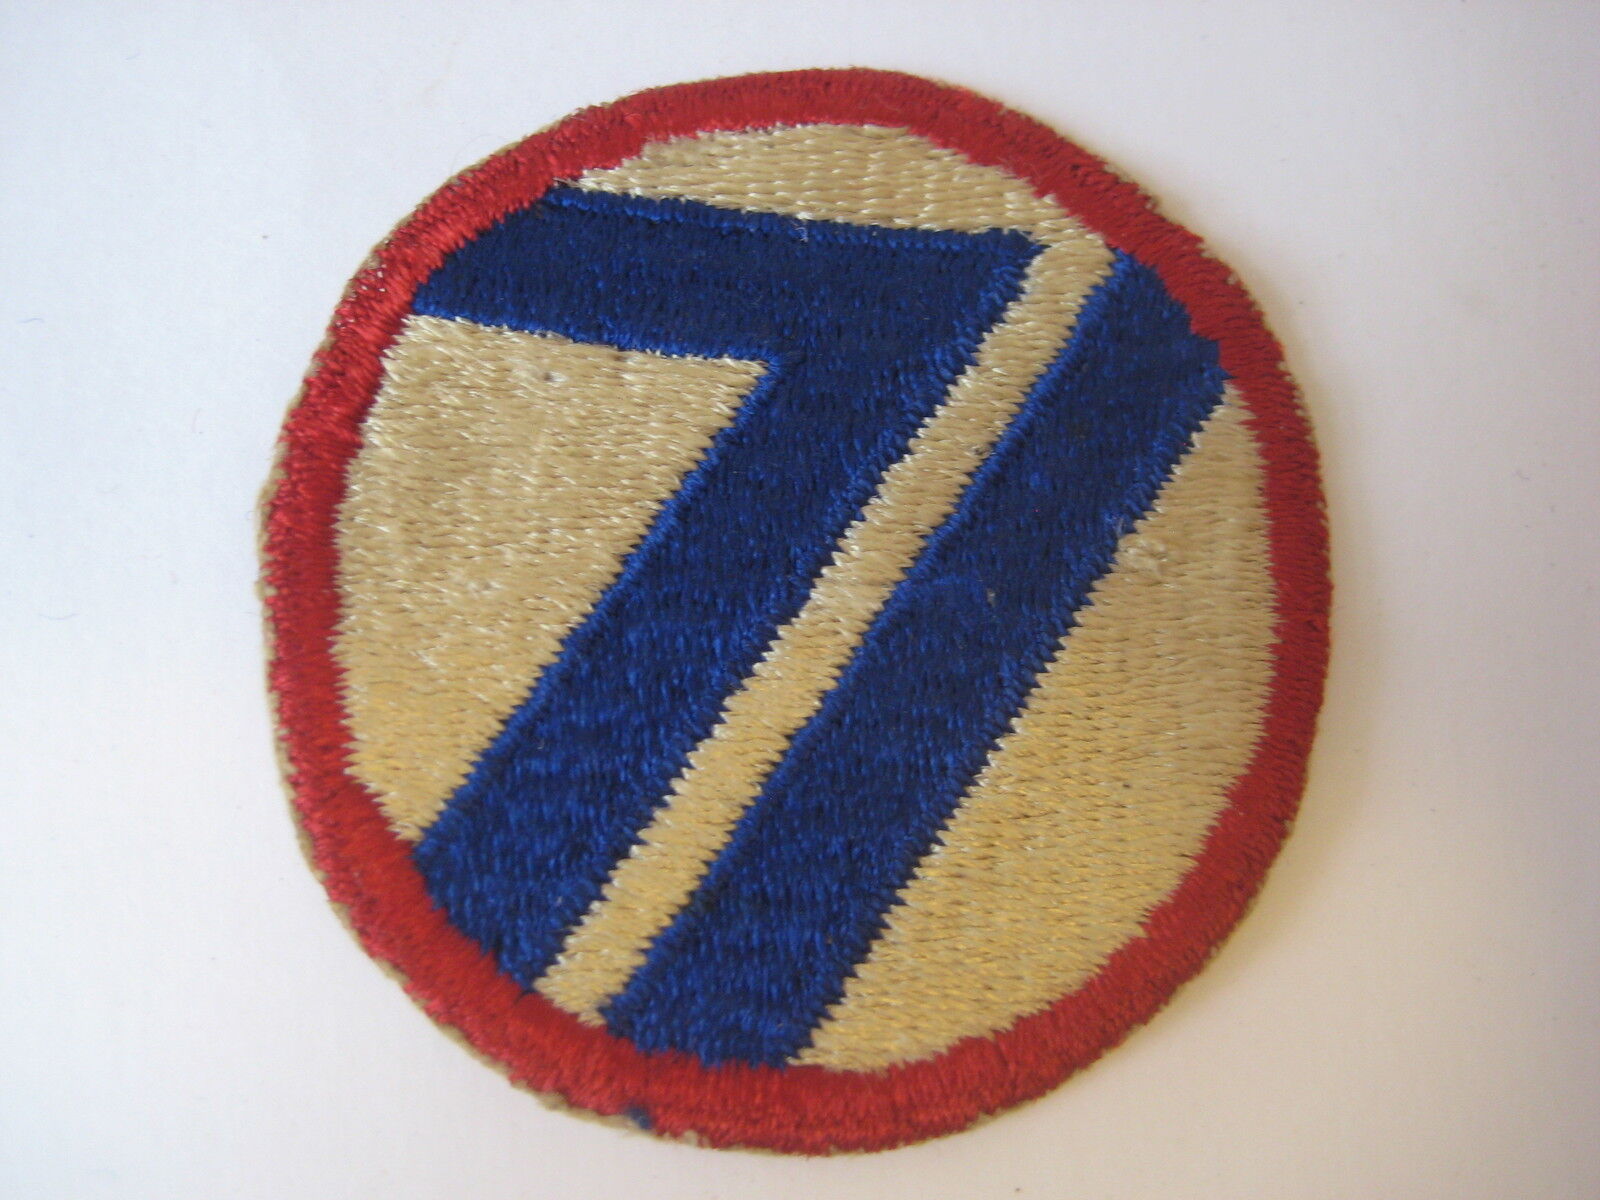 US Army military vtg 71st Infantry Division PATCH usa uniform badge WWII era ?